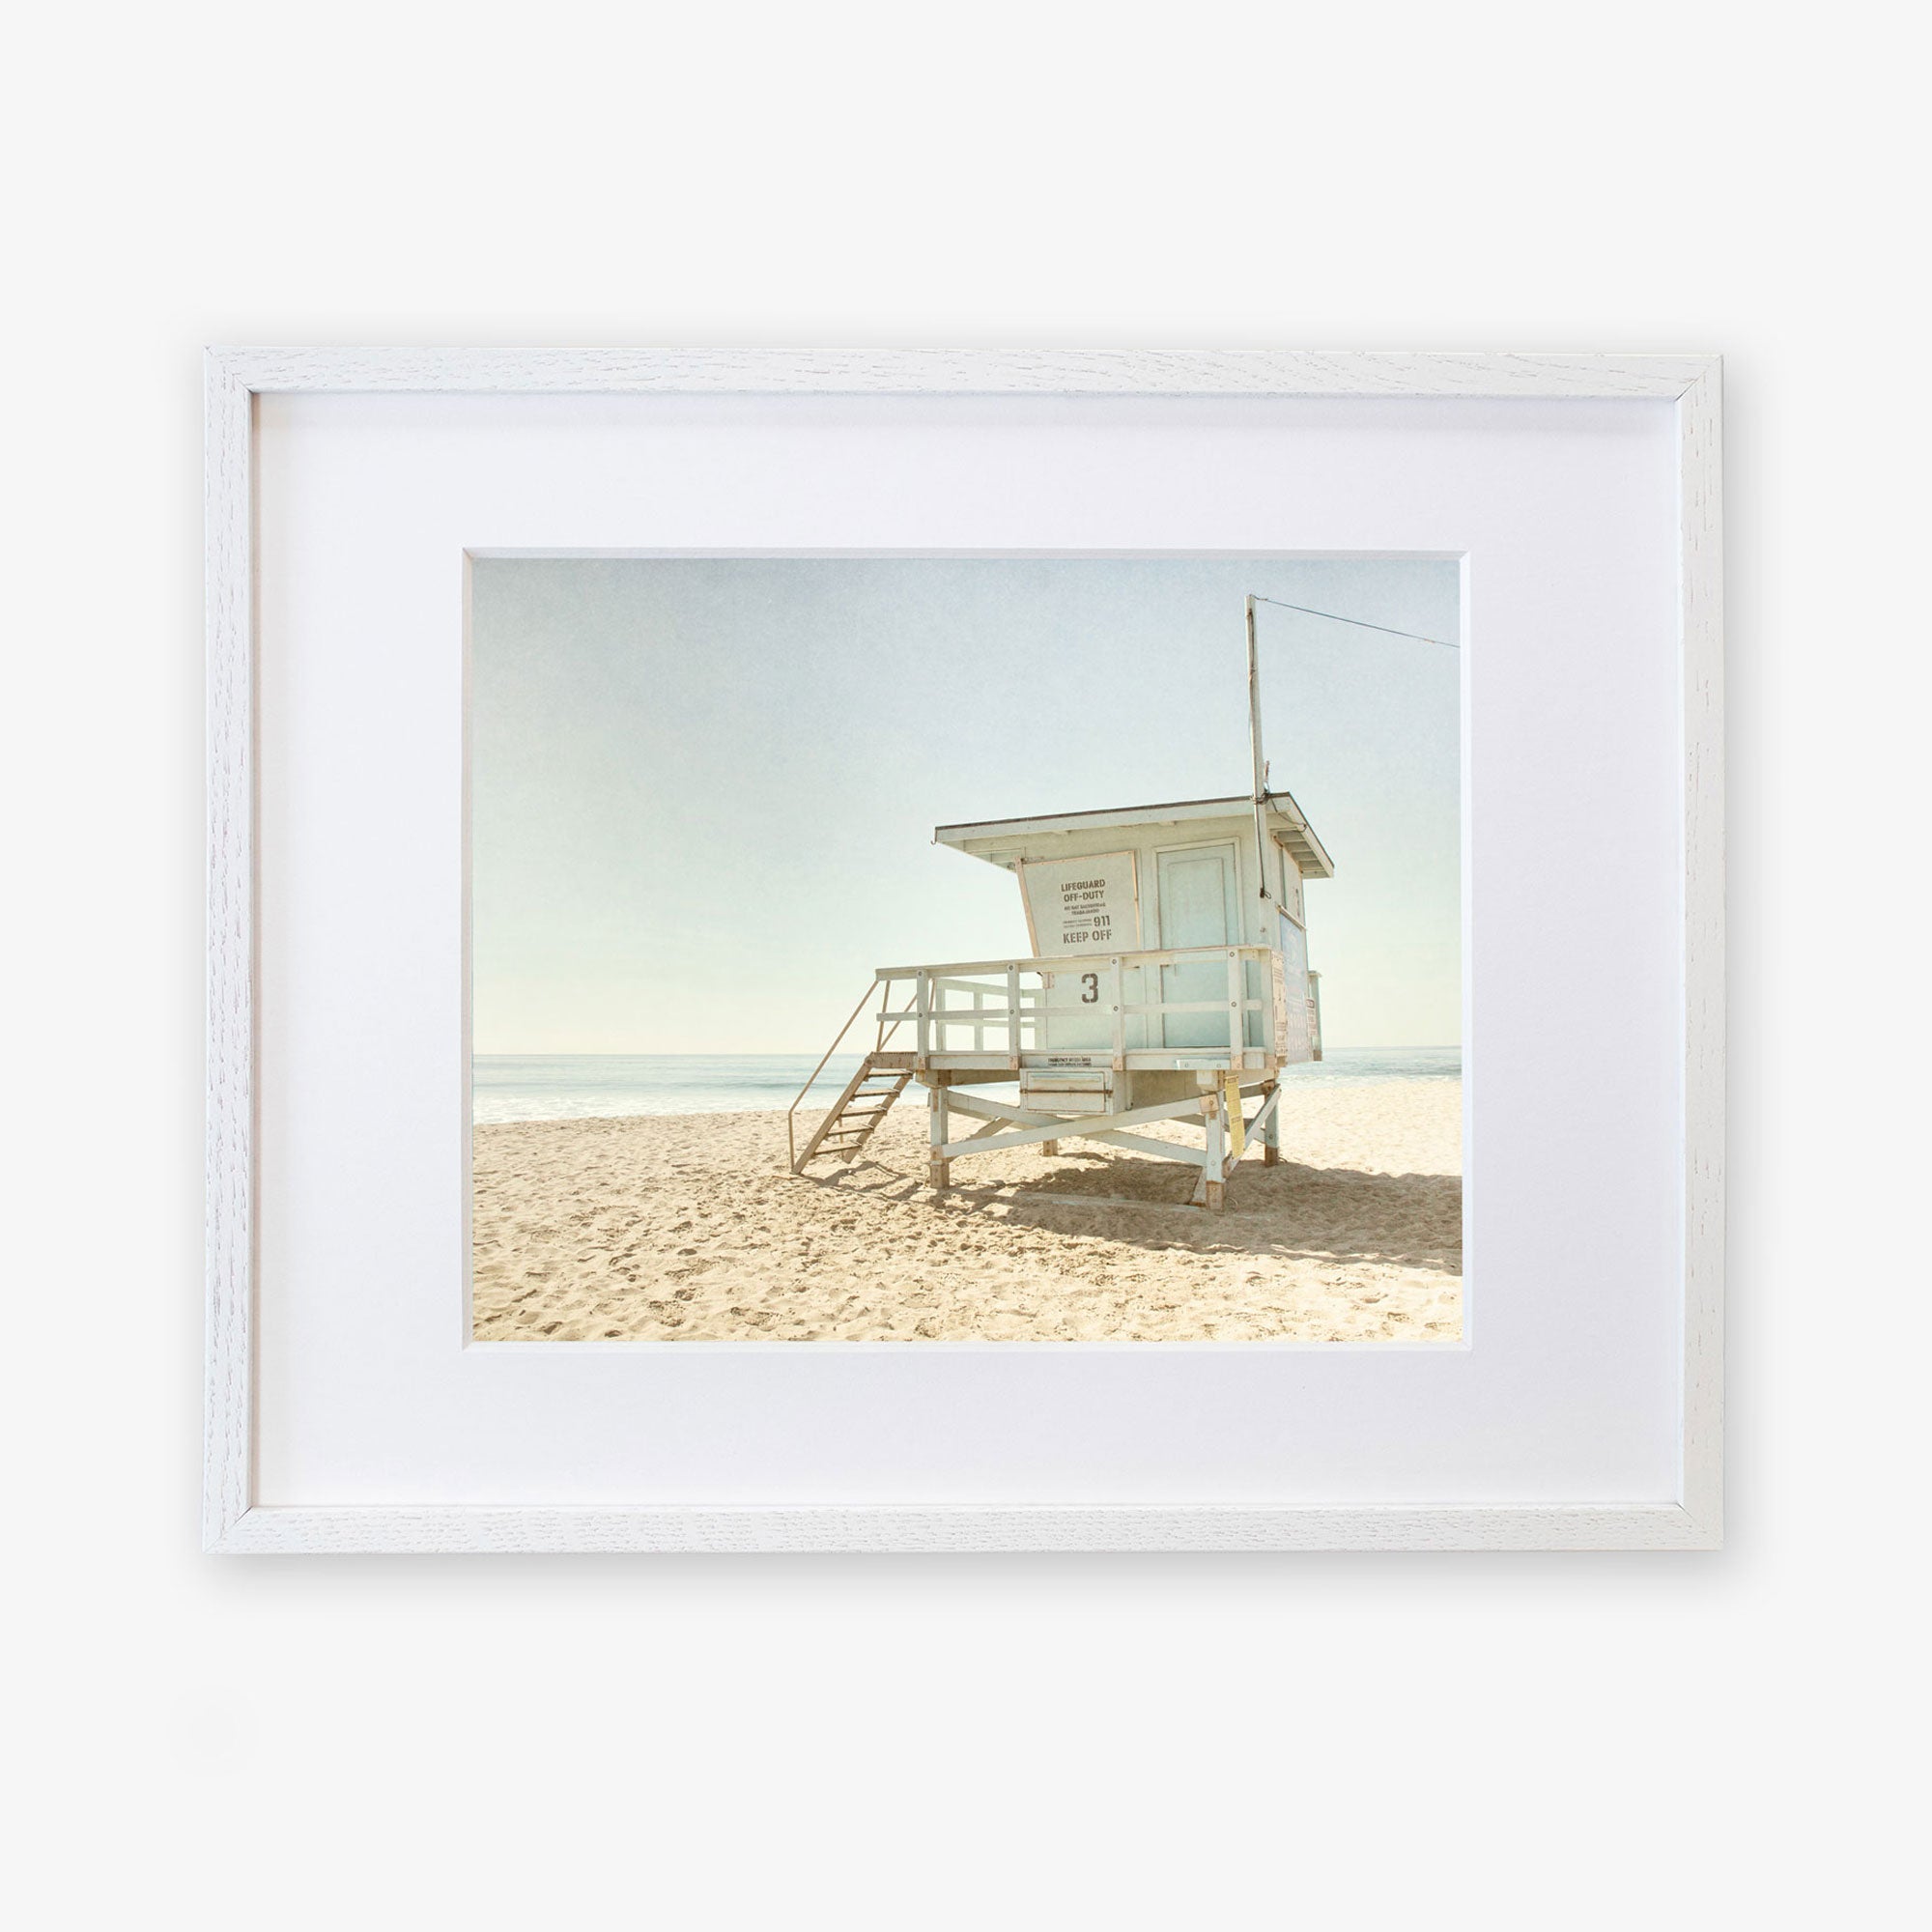 A framed photograph of &quot;California Summer Beach Art, &#39;Malibu Lifeguard Tower&#39;&quot; by Offley Green, numbered &quot;3&quot; with stairs leading up to the enclosed platform.